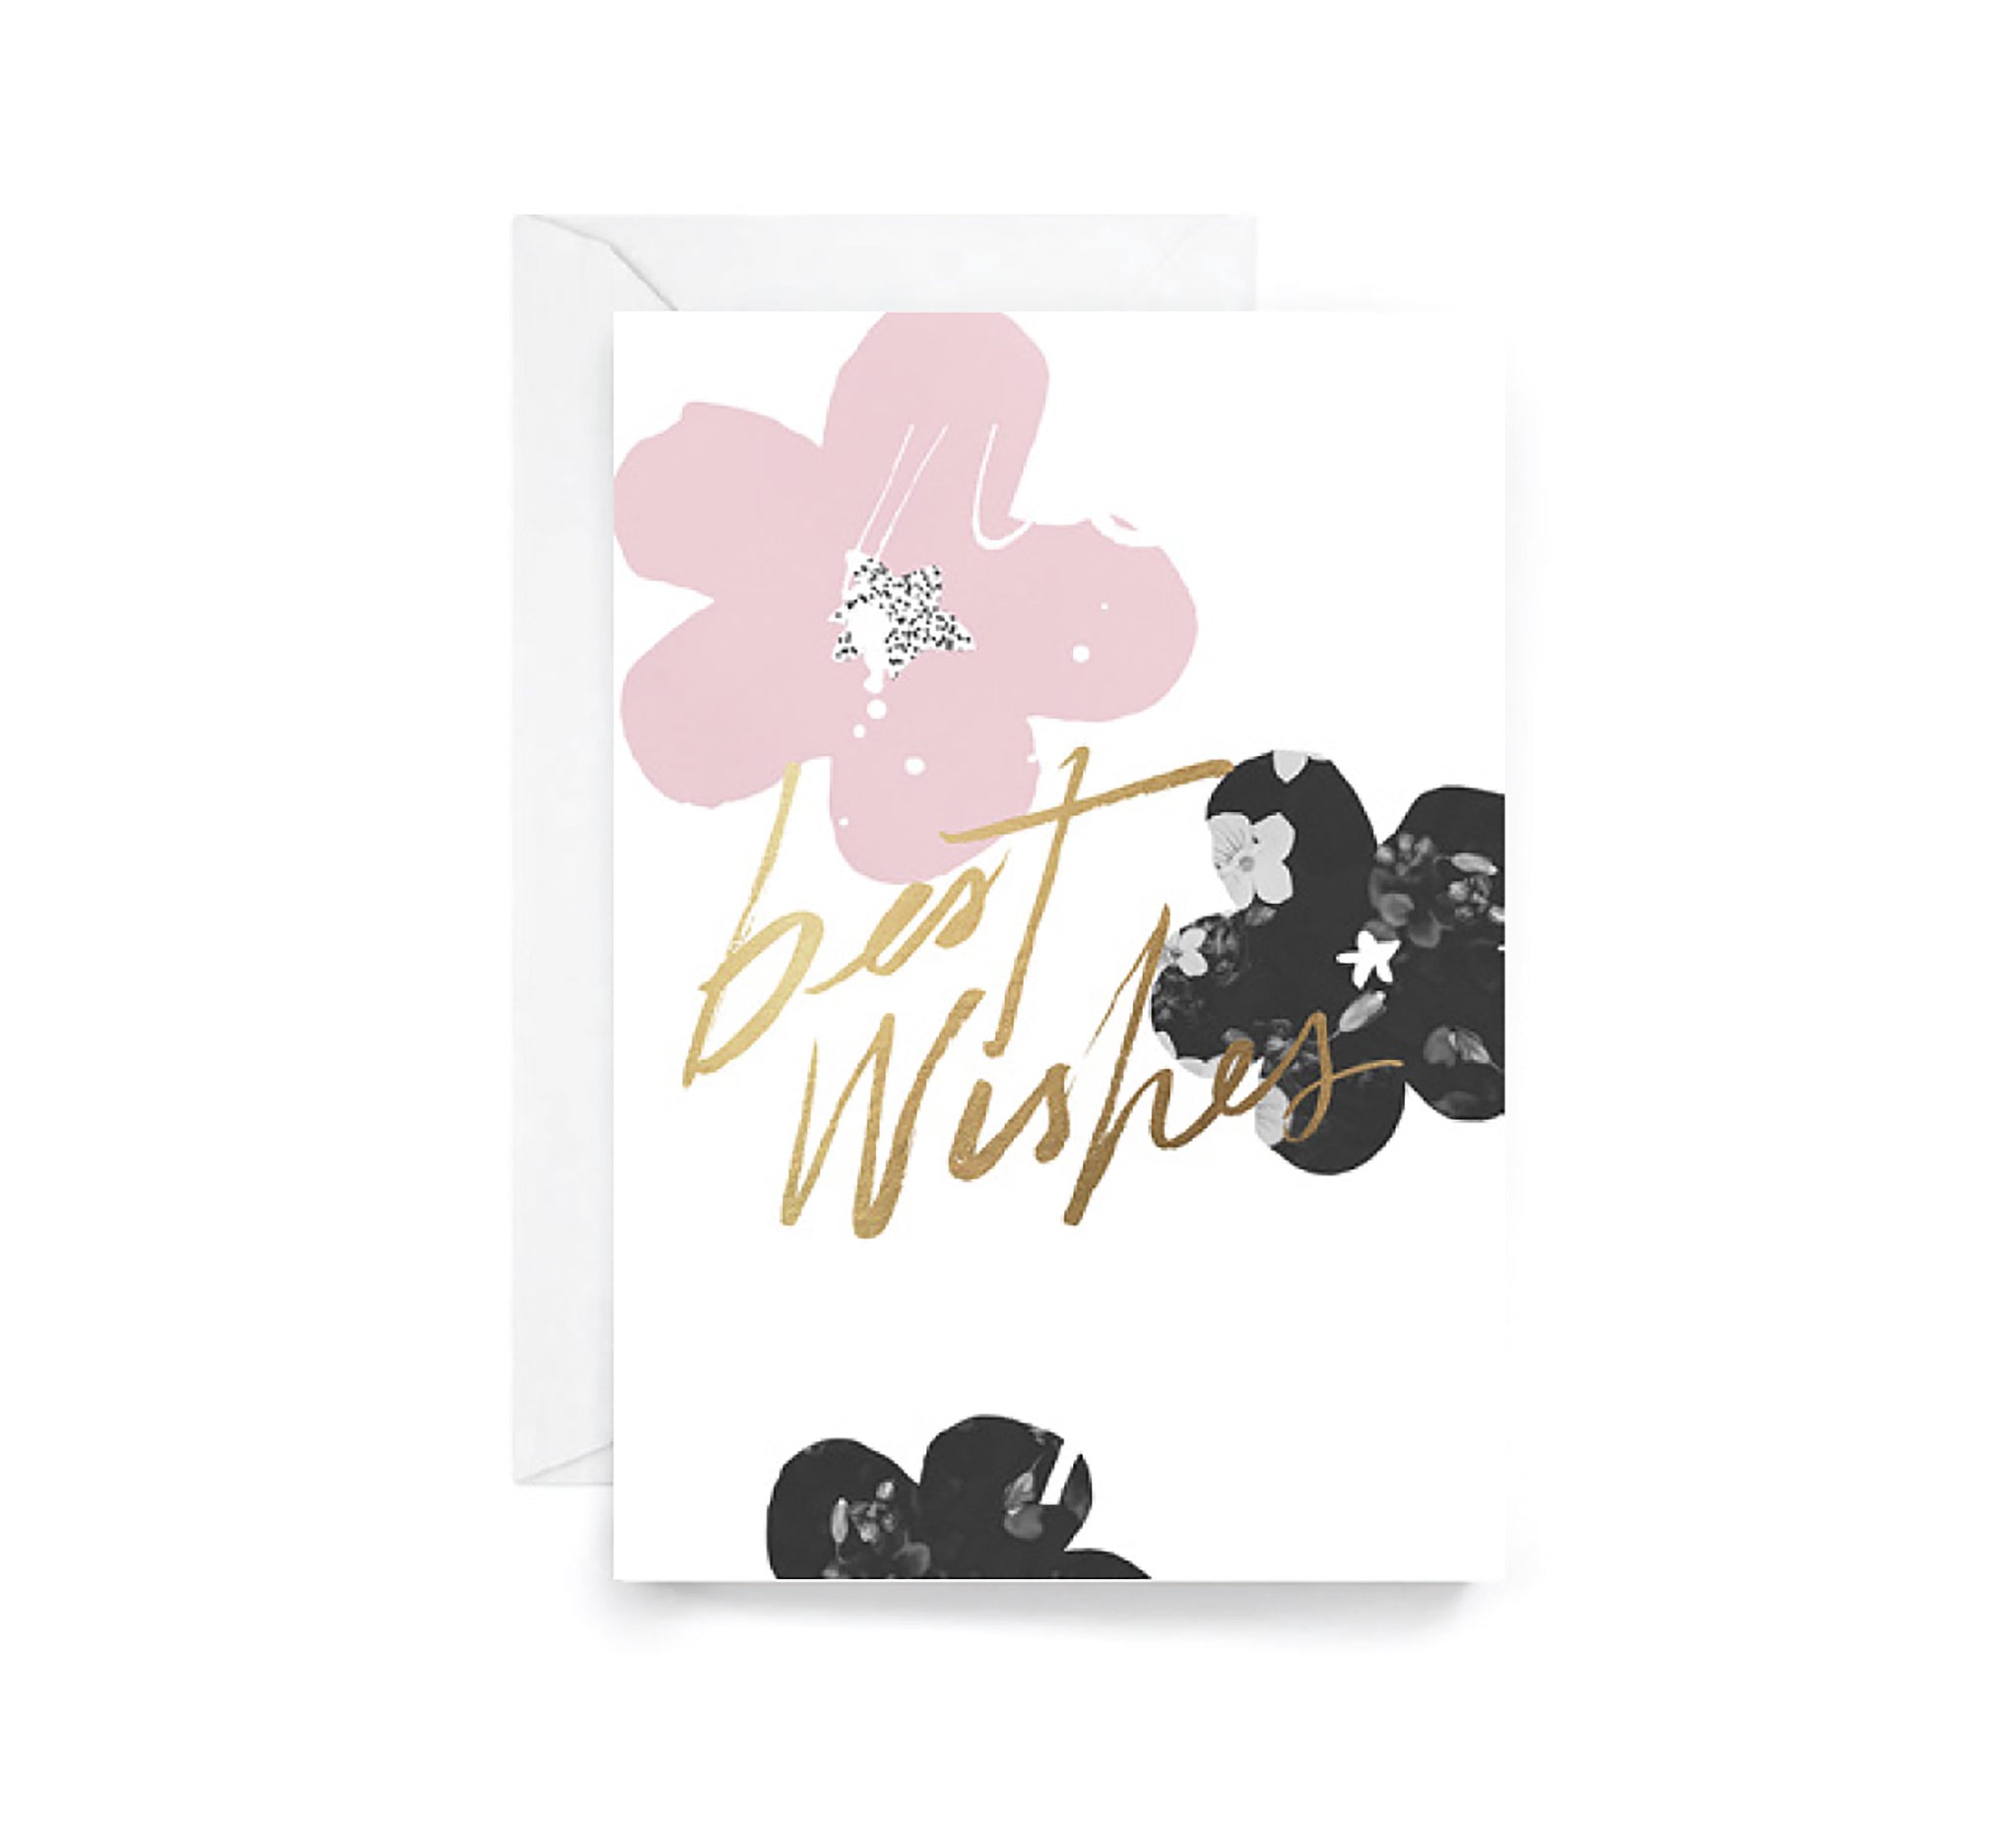 14. BEST WISHES CARDS - (PACK OF 6)